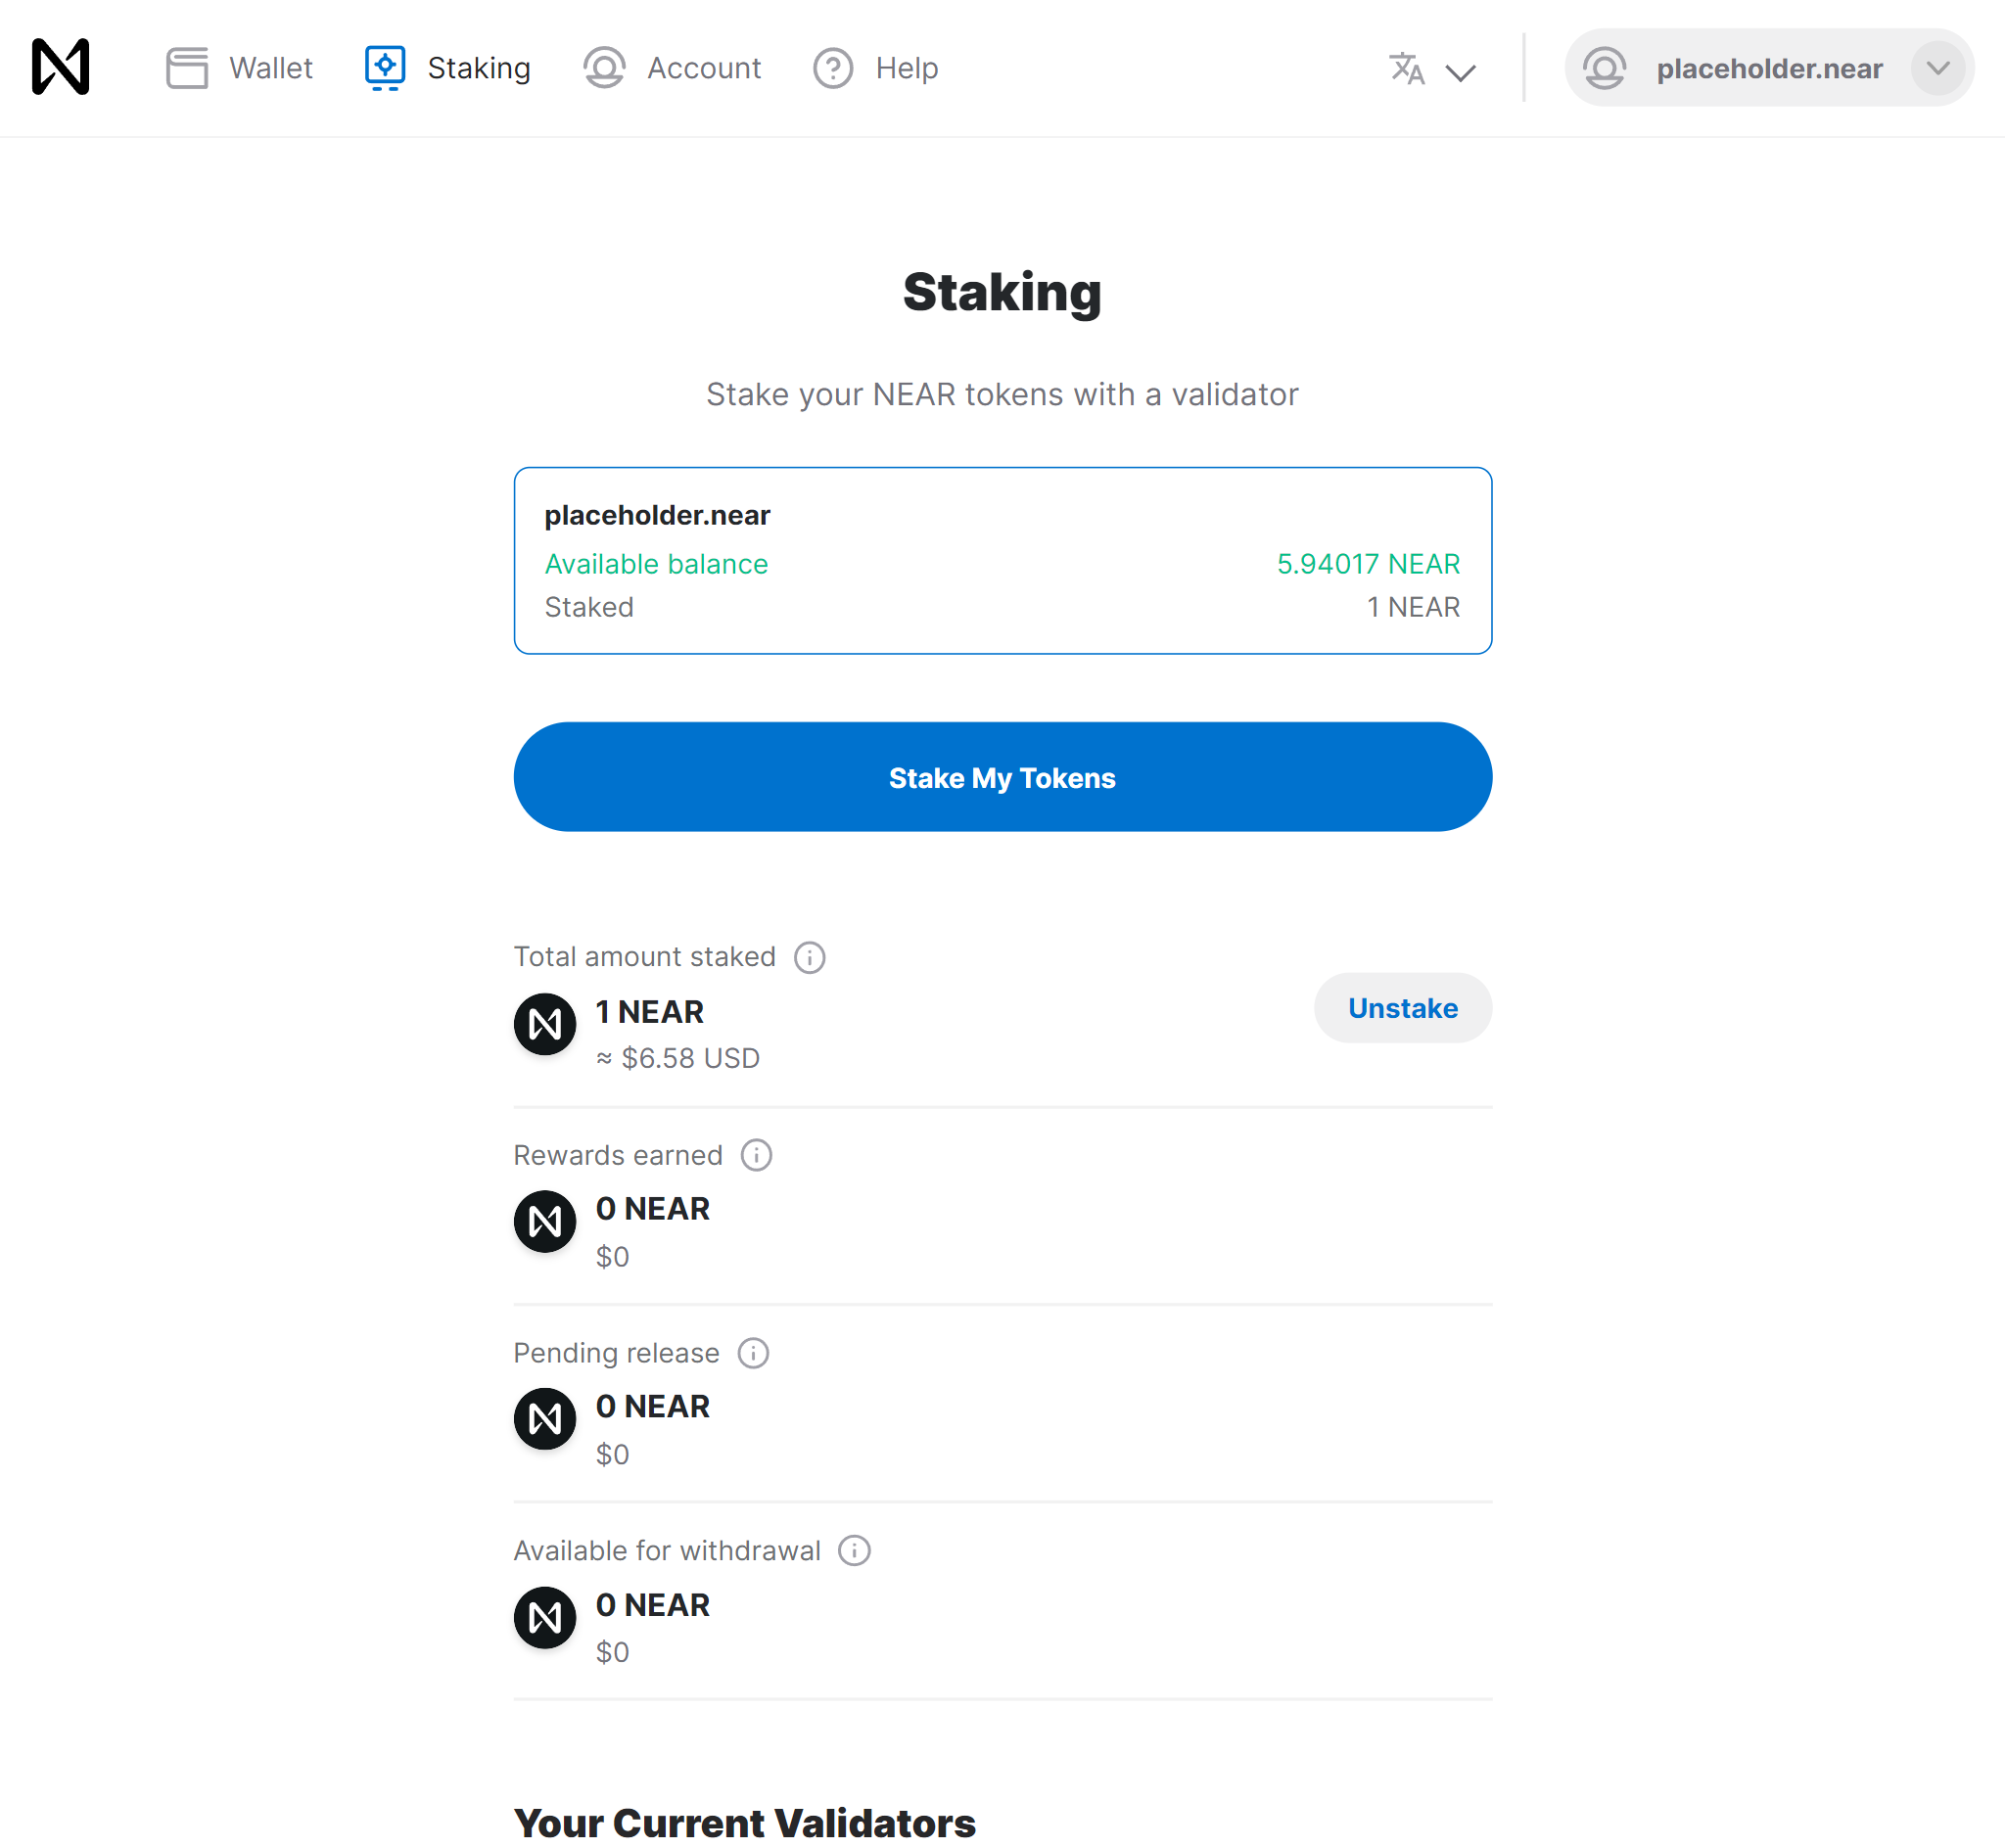 Staking overview update